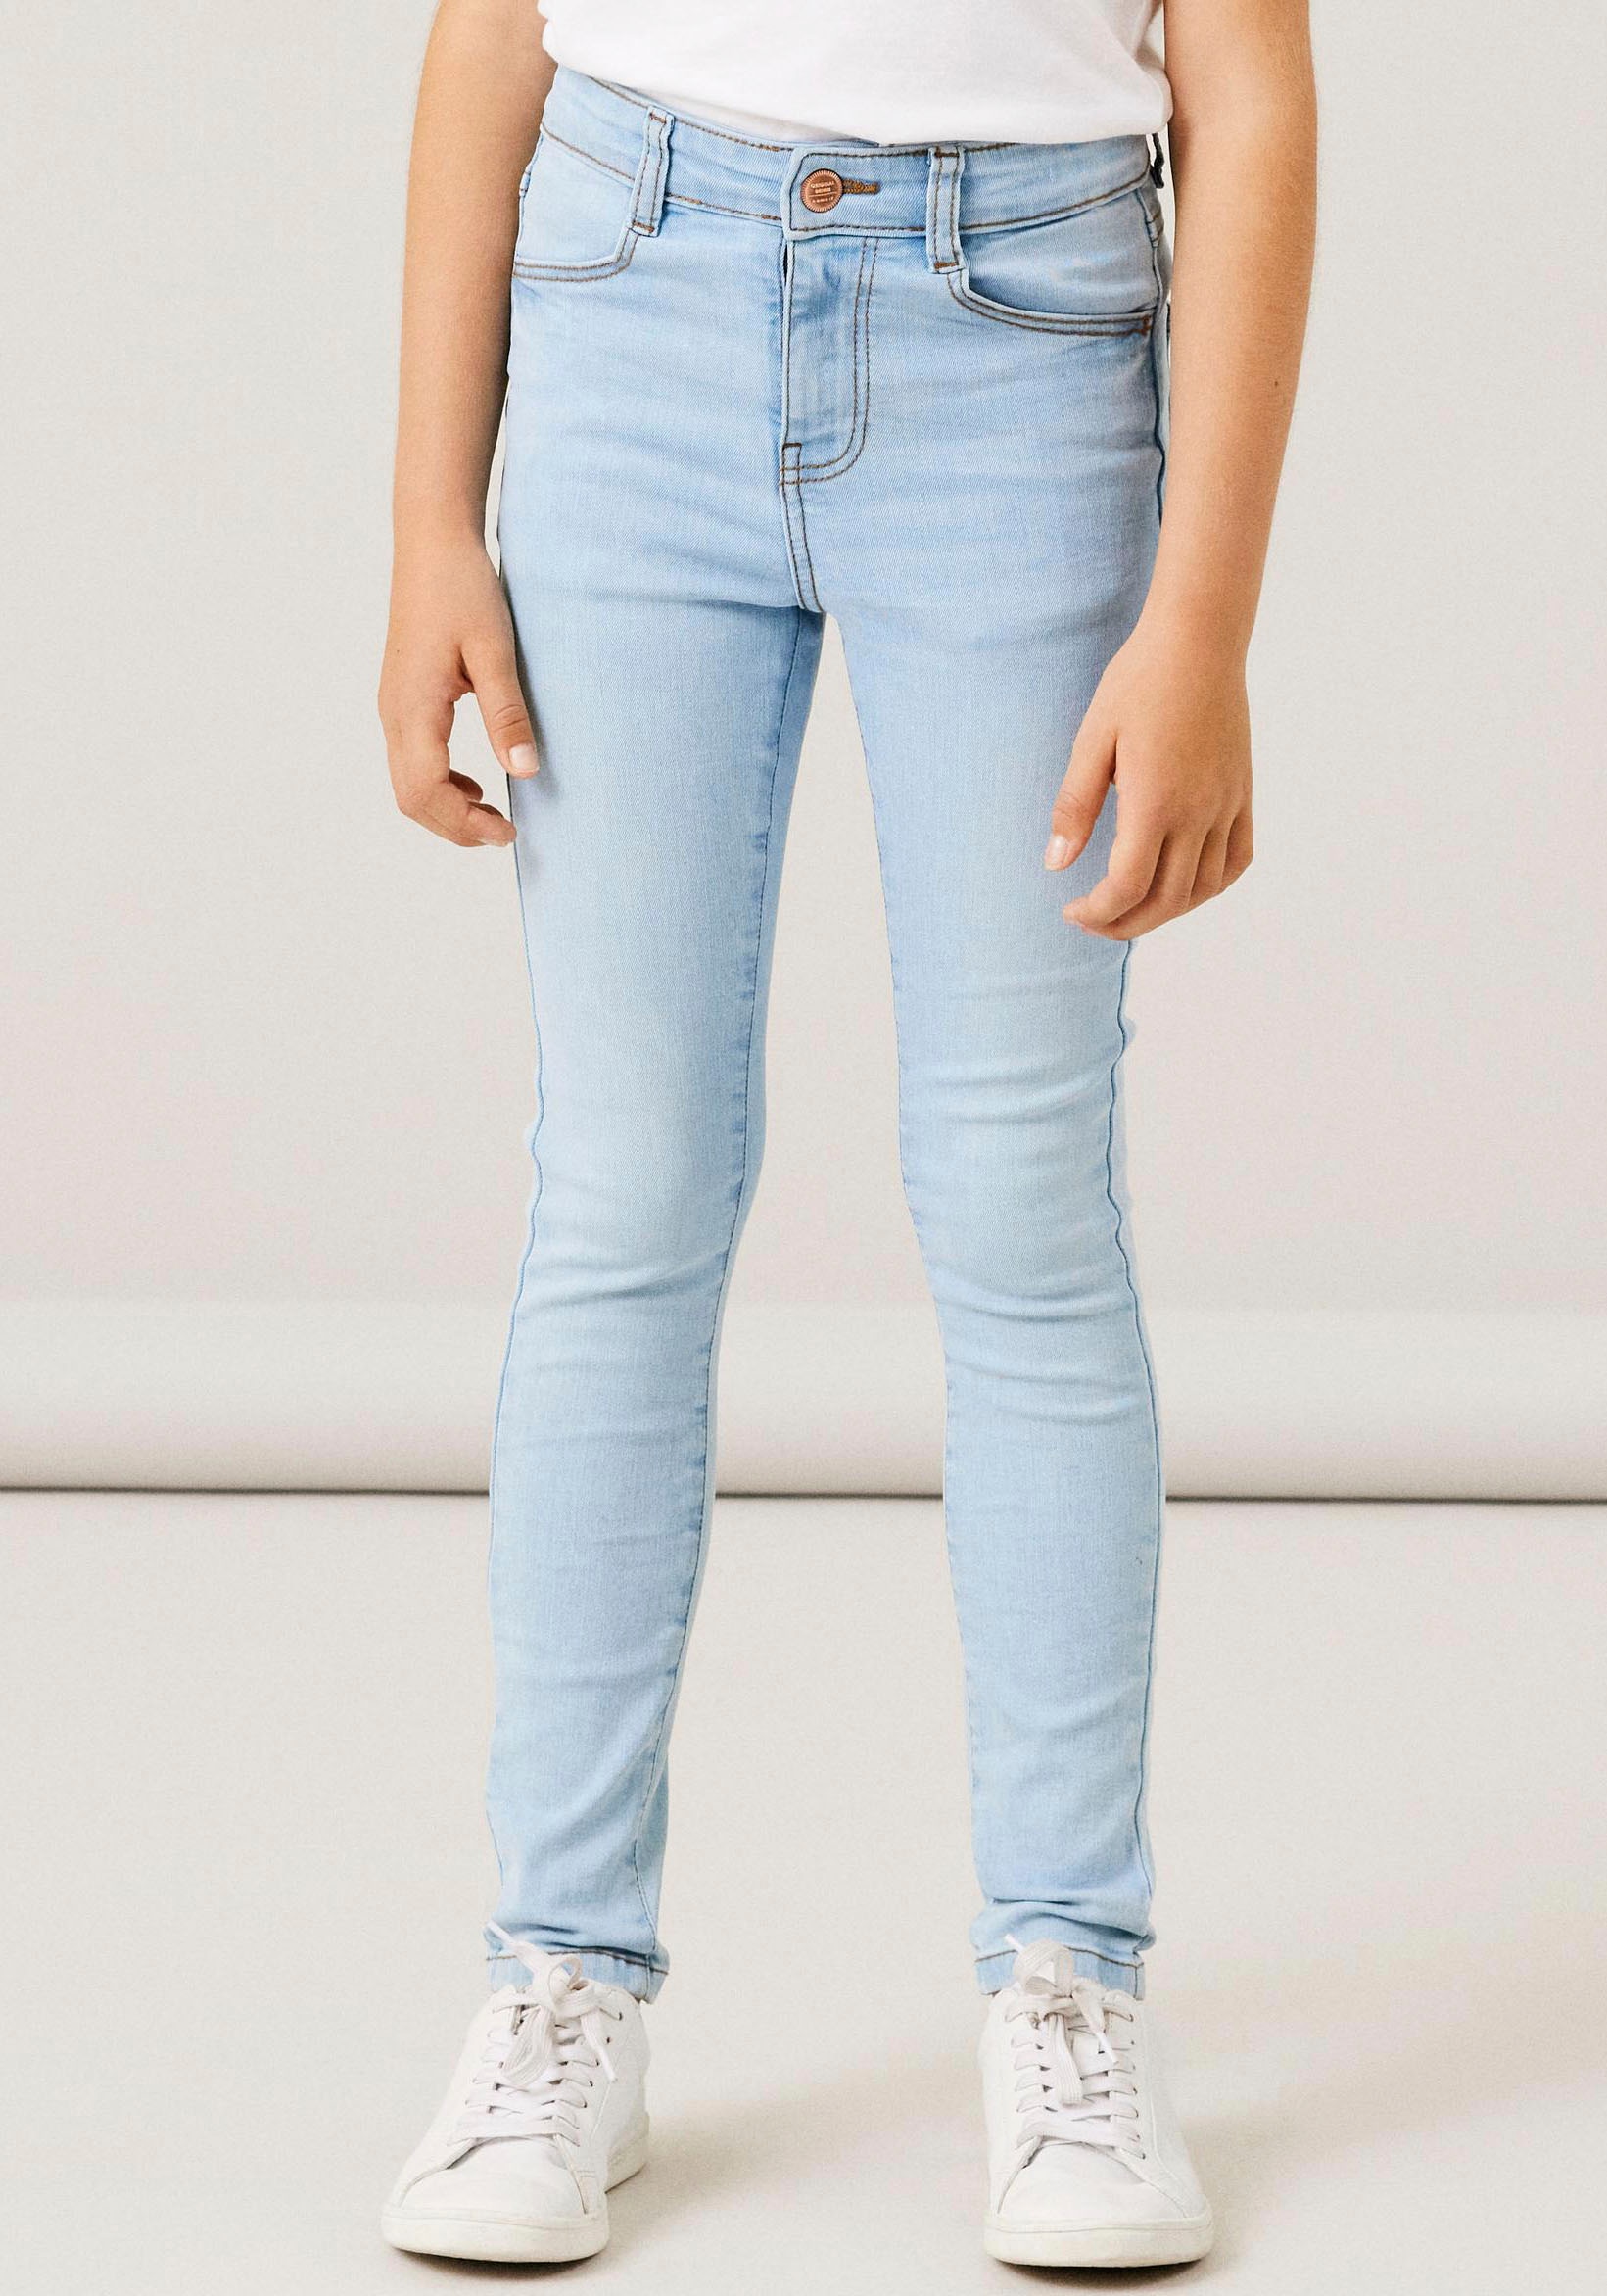 Trendige Name It ohne Stretch 1180-ST mit HW Skinny-fit-Jeans JEANS SKINNY shoppen NOOS«, Mindestbestellwert »NKFPOLLY